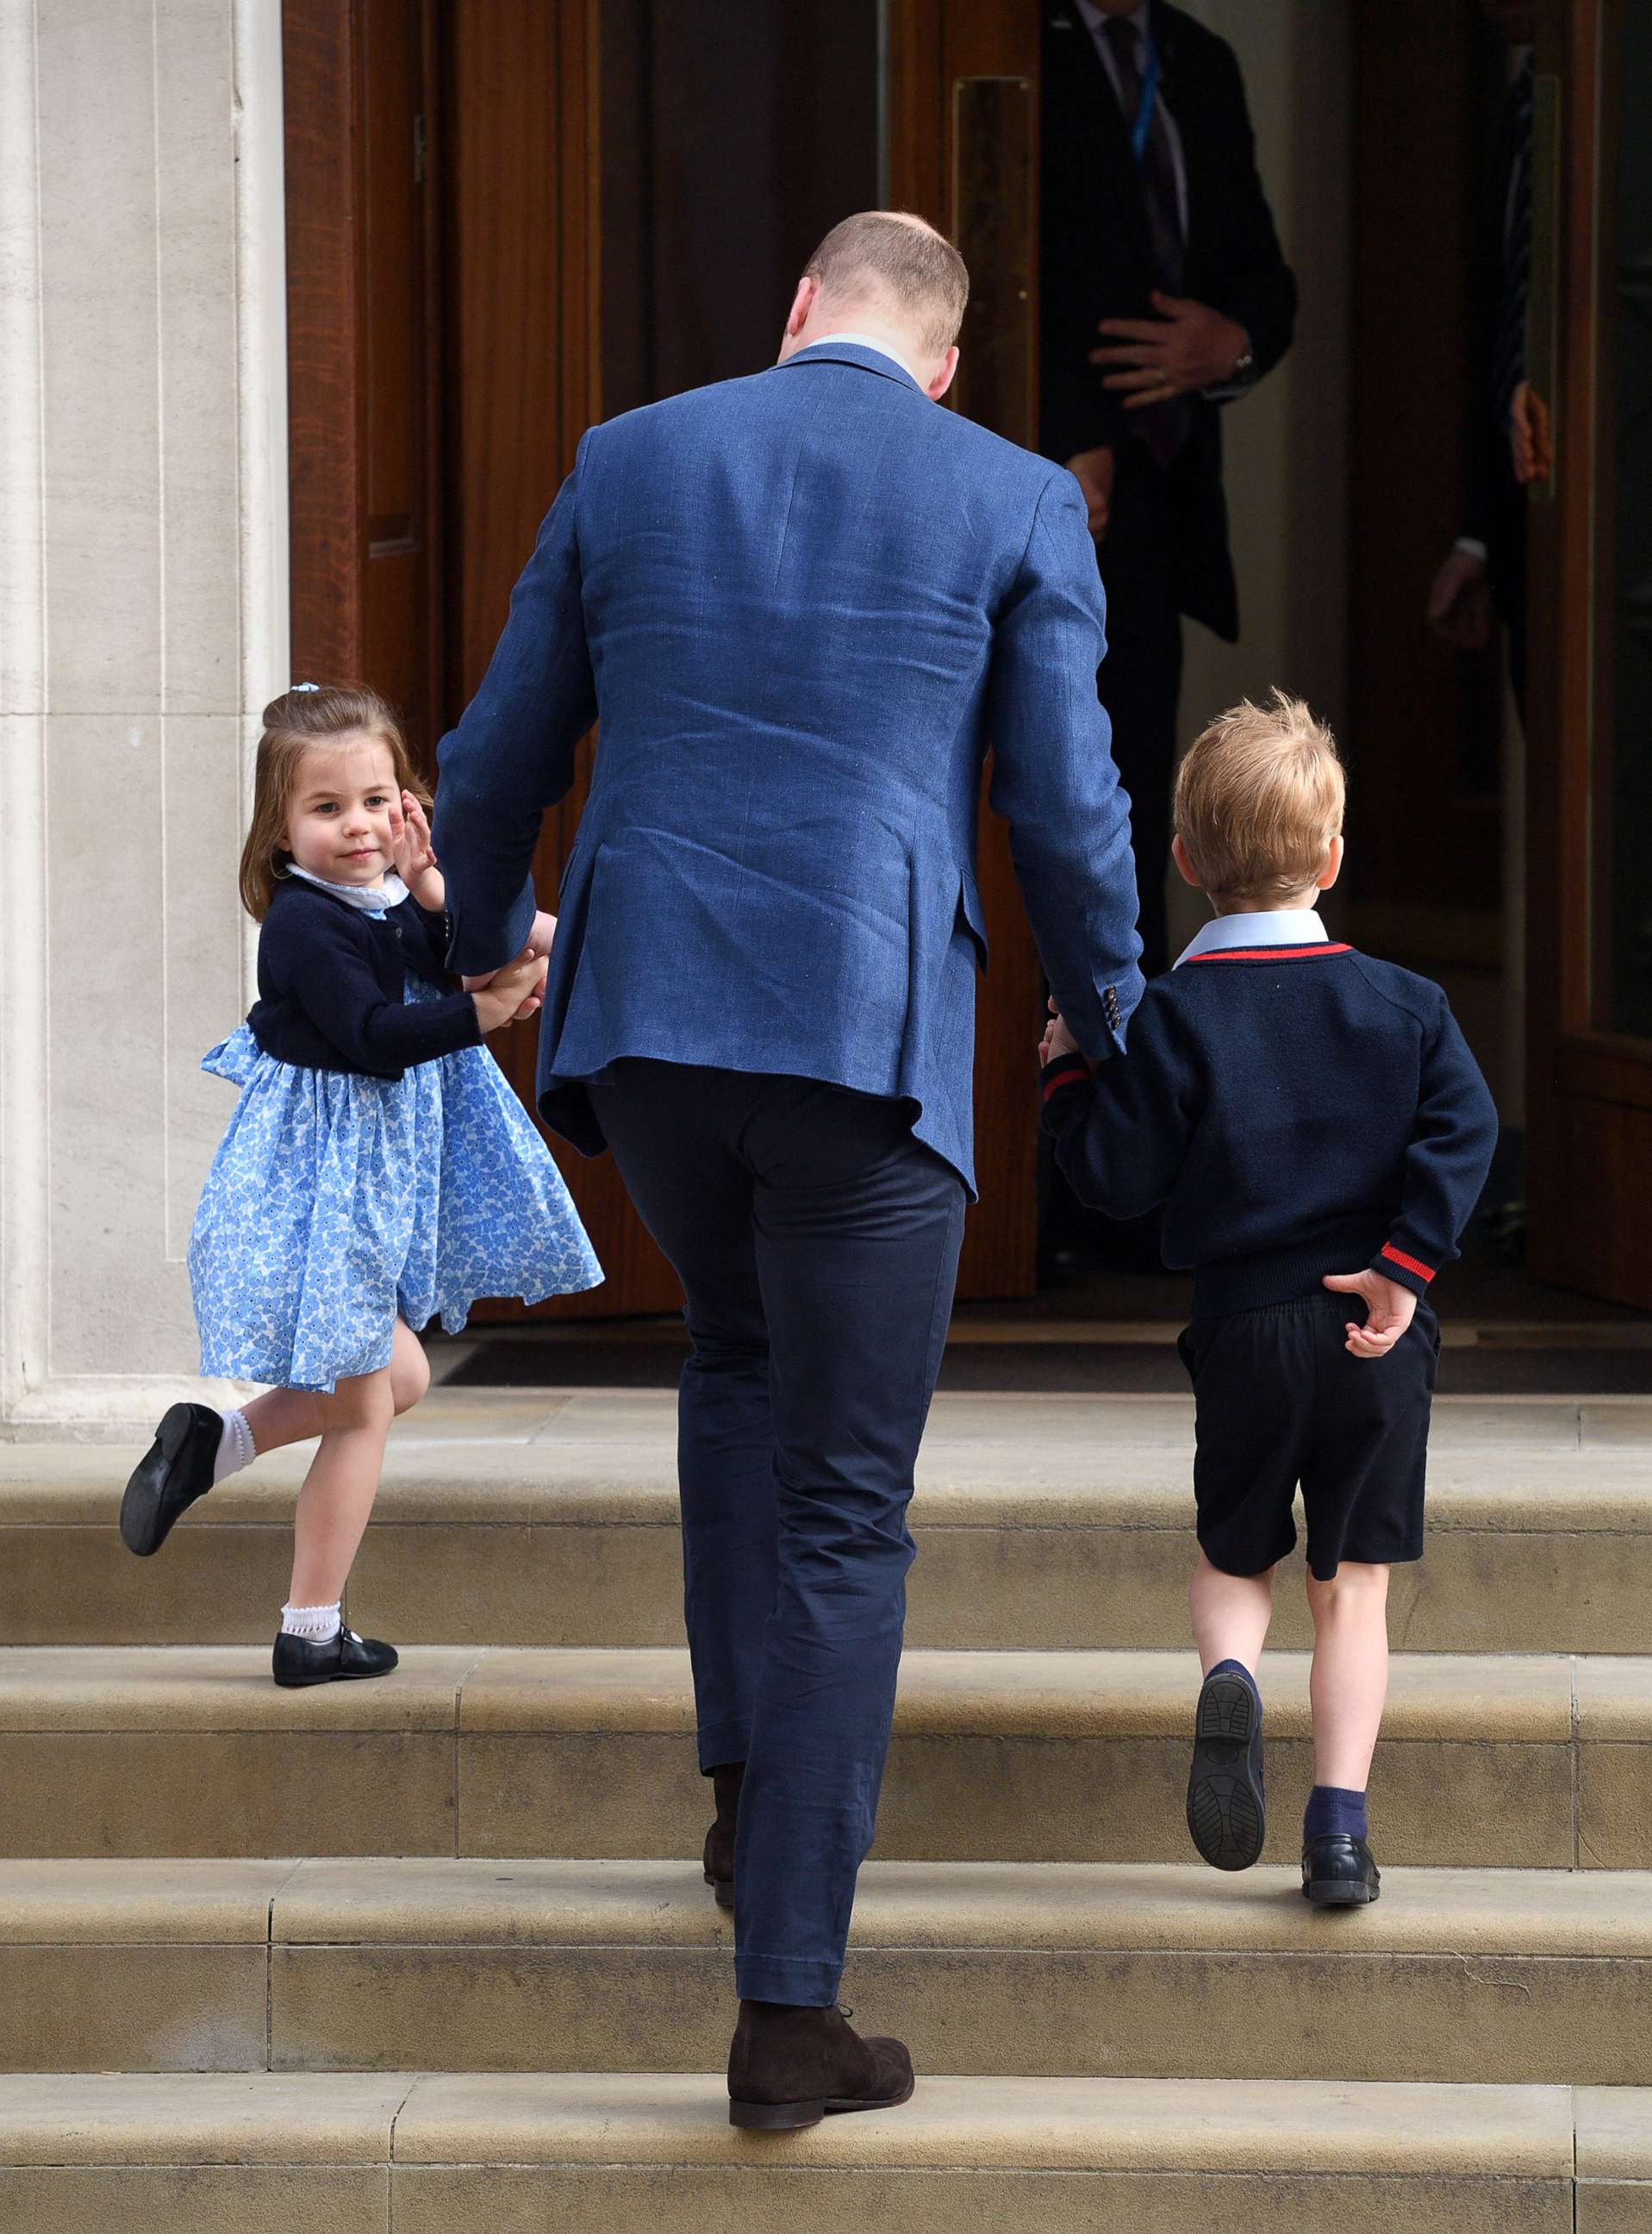 PHOTO: Princess Charlotte waves to the press as she arrives with her father, Prince William, Duke of Cambridge and Prince George to the Lindo Wing of St. Mary's Hospital to meet her new baby brother, Louis, April 23, 2018 in London.